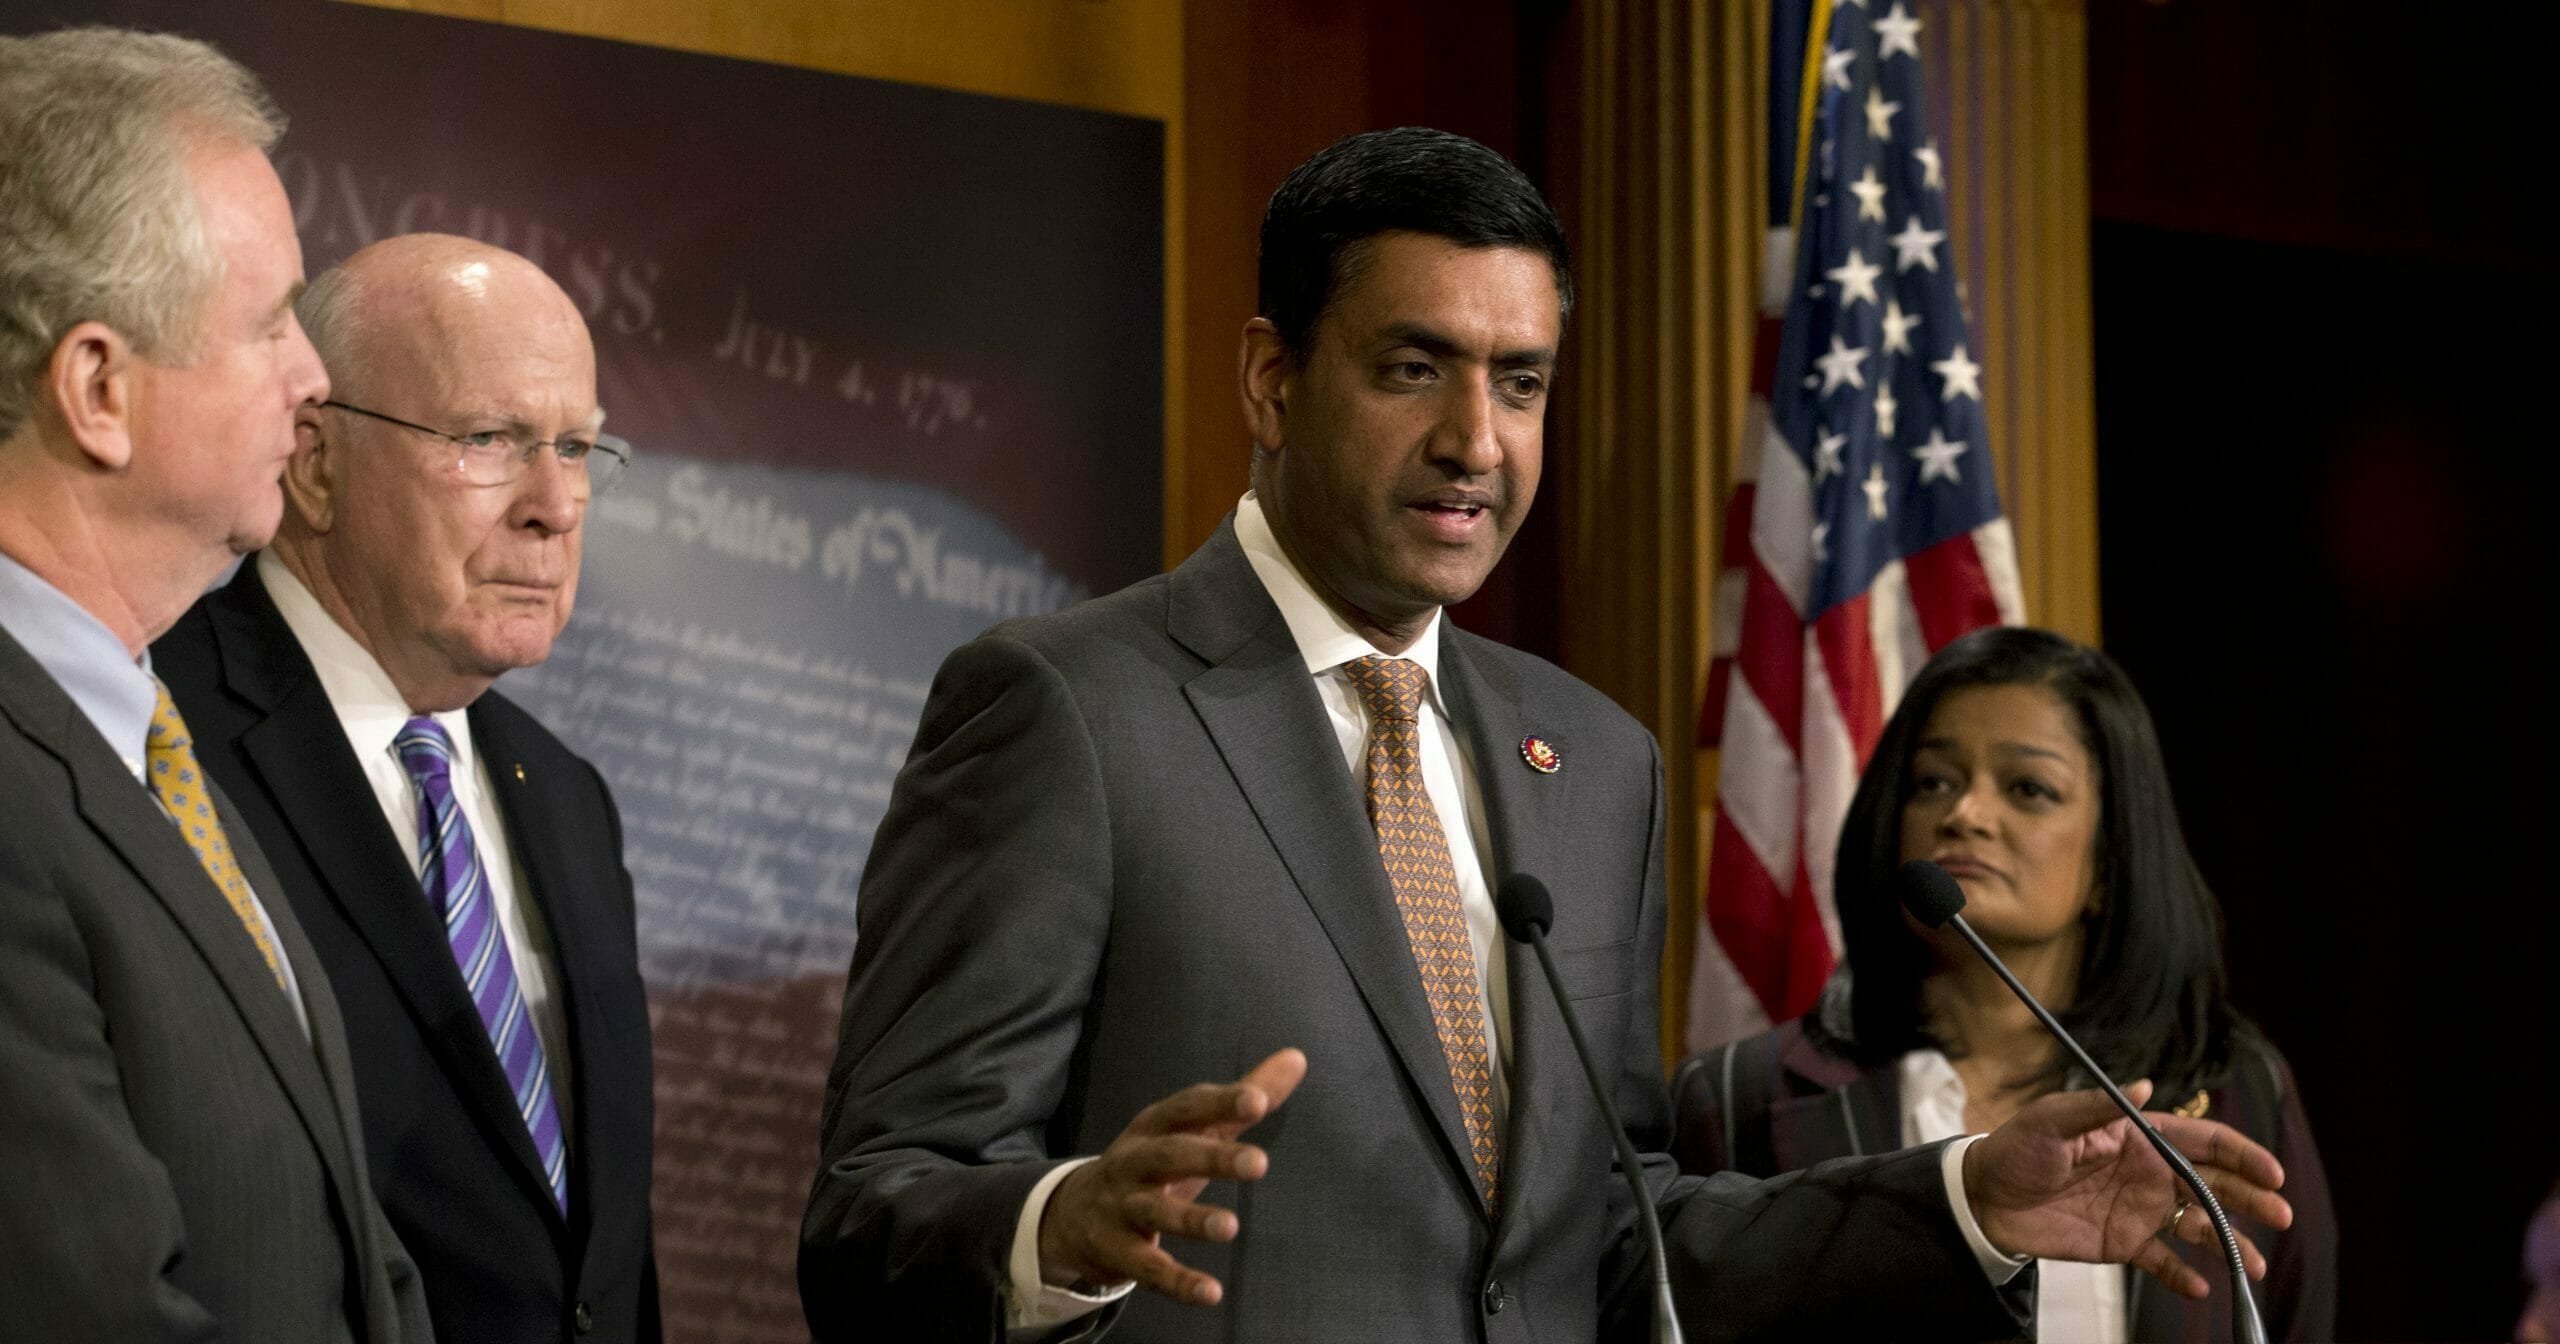 Democratic Rep. Ro Khanna of California, accompanied by Sen. Chris Van Hollen of Maryland, Sen. Patrick Leahy of Vermont and Rep. Pramila Jayapal of Washington, speaks during a news conference on a measure limiting President Donald Trump's ability to take military action against Iran on Capitol Hill in Washington on Jan. 9, 2020.